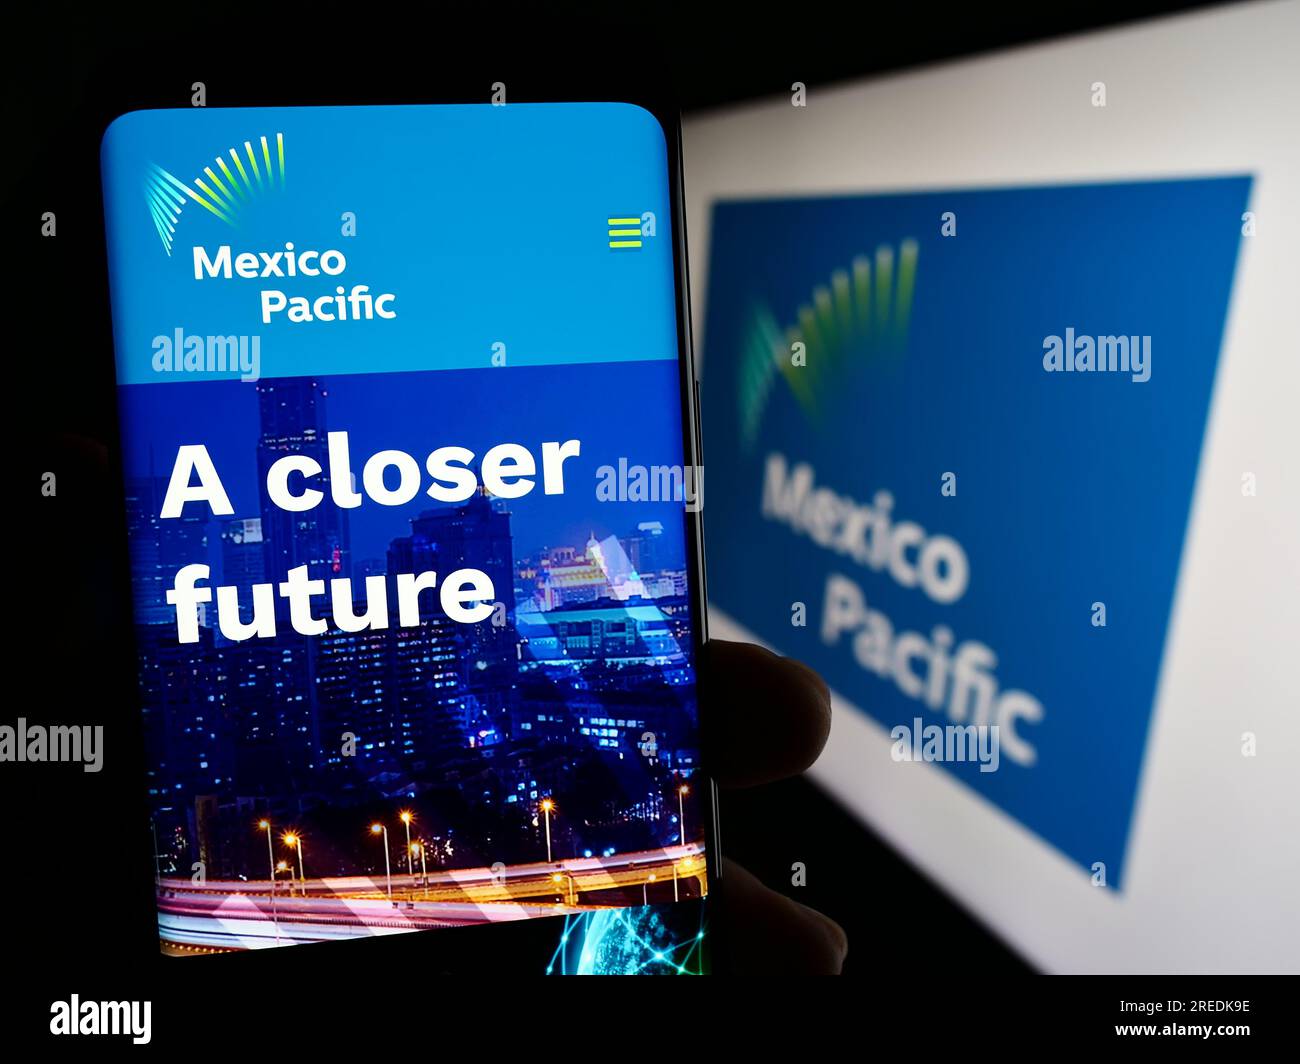 Person holding cellphone with webpage of company Mexico Pacific Ltd. LLC on screen in front of business logo. Focus on top-left of phone display. Stock Photo